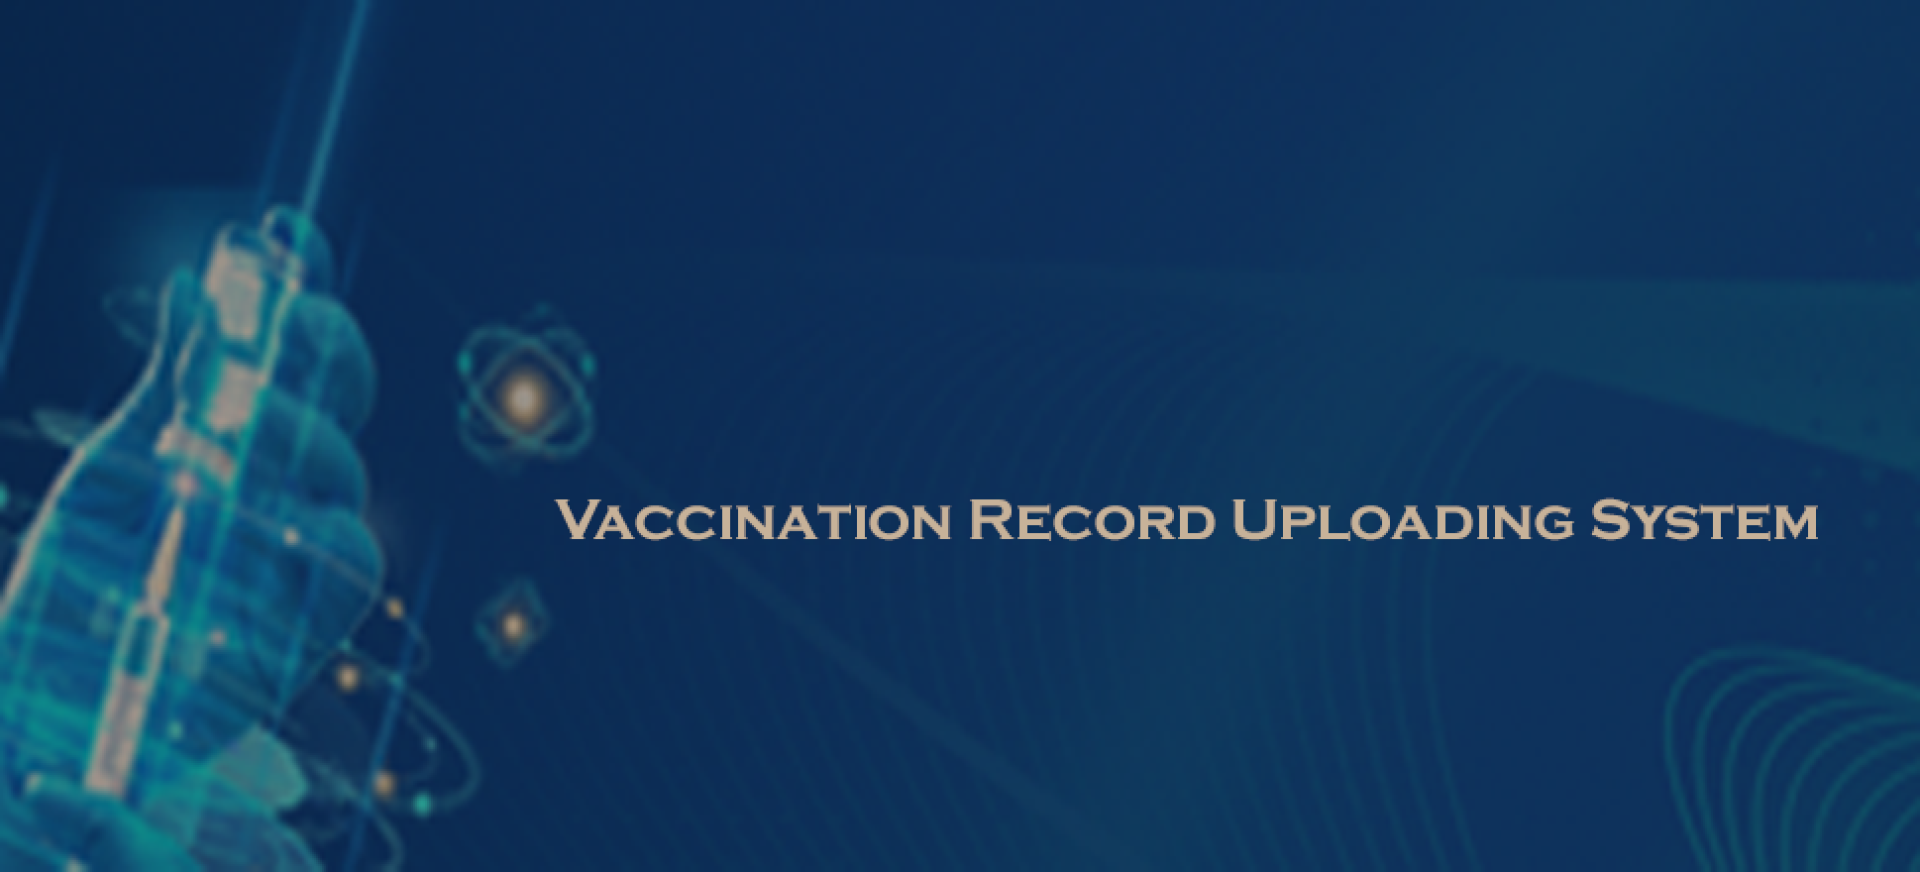 Issue 13 - Vaccination Record Uploading System